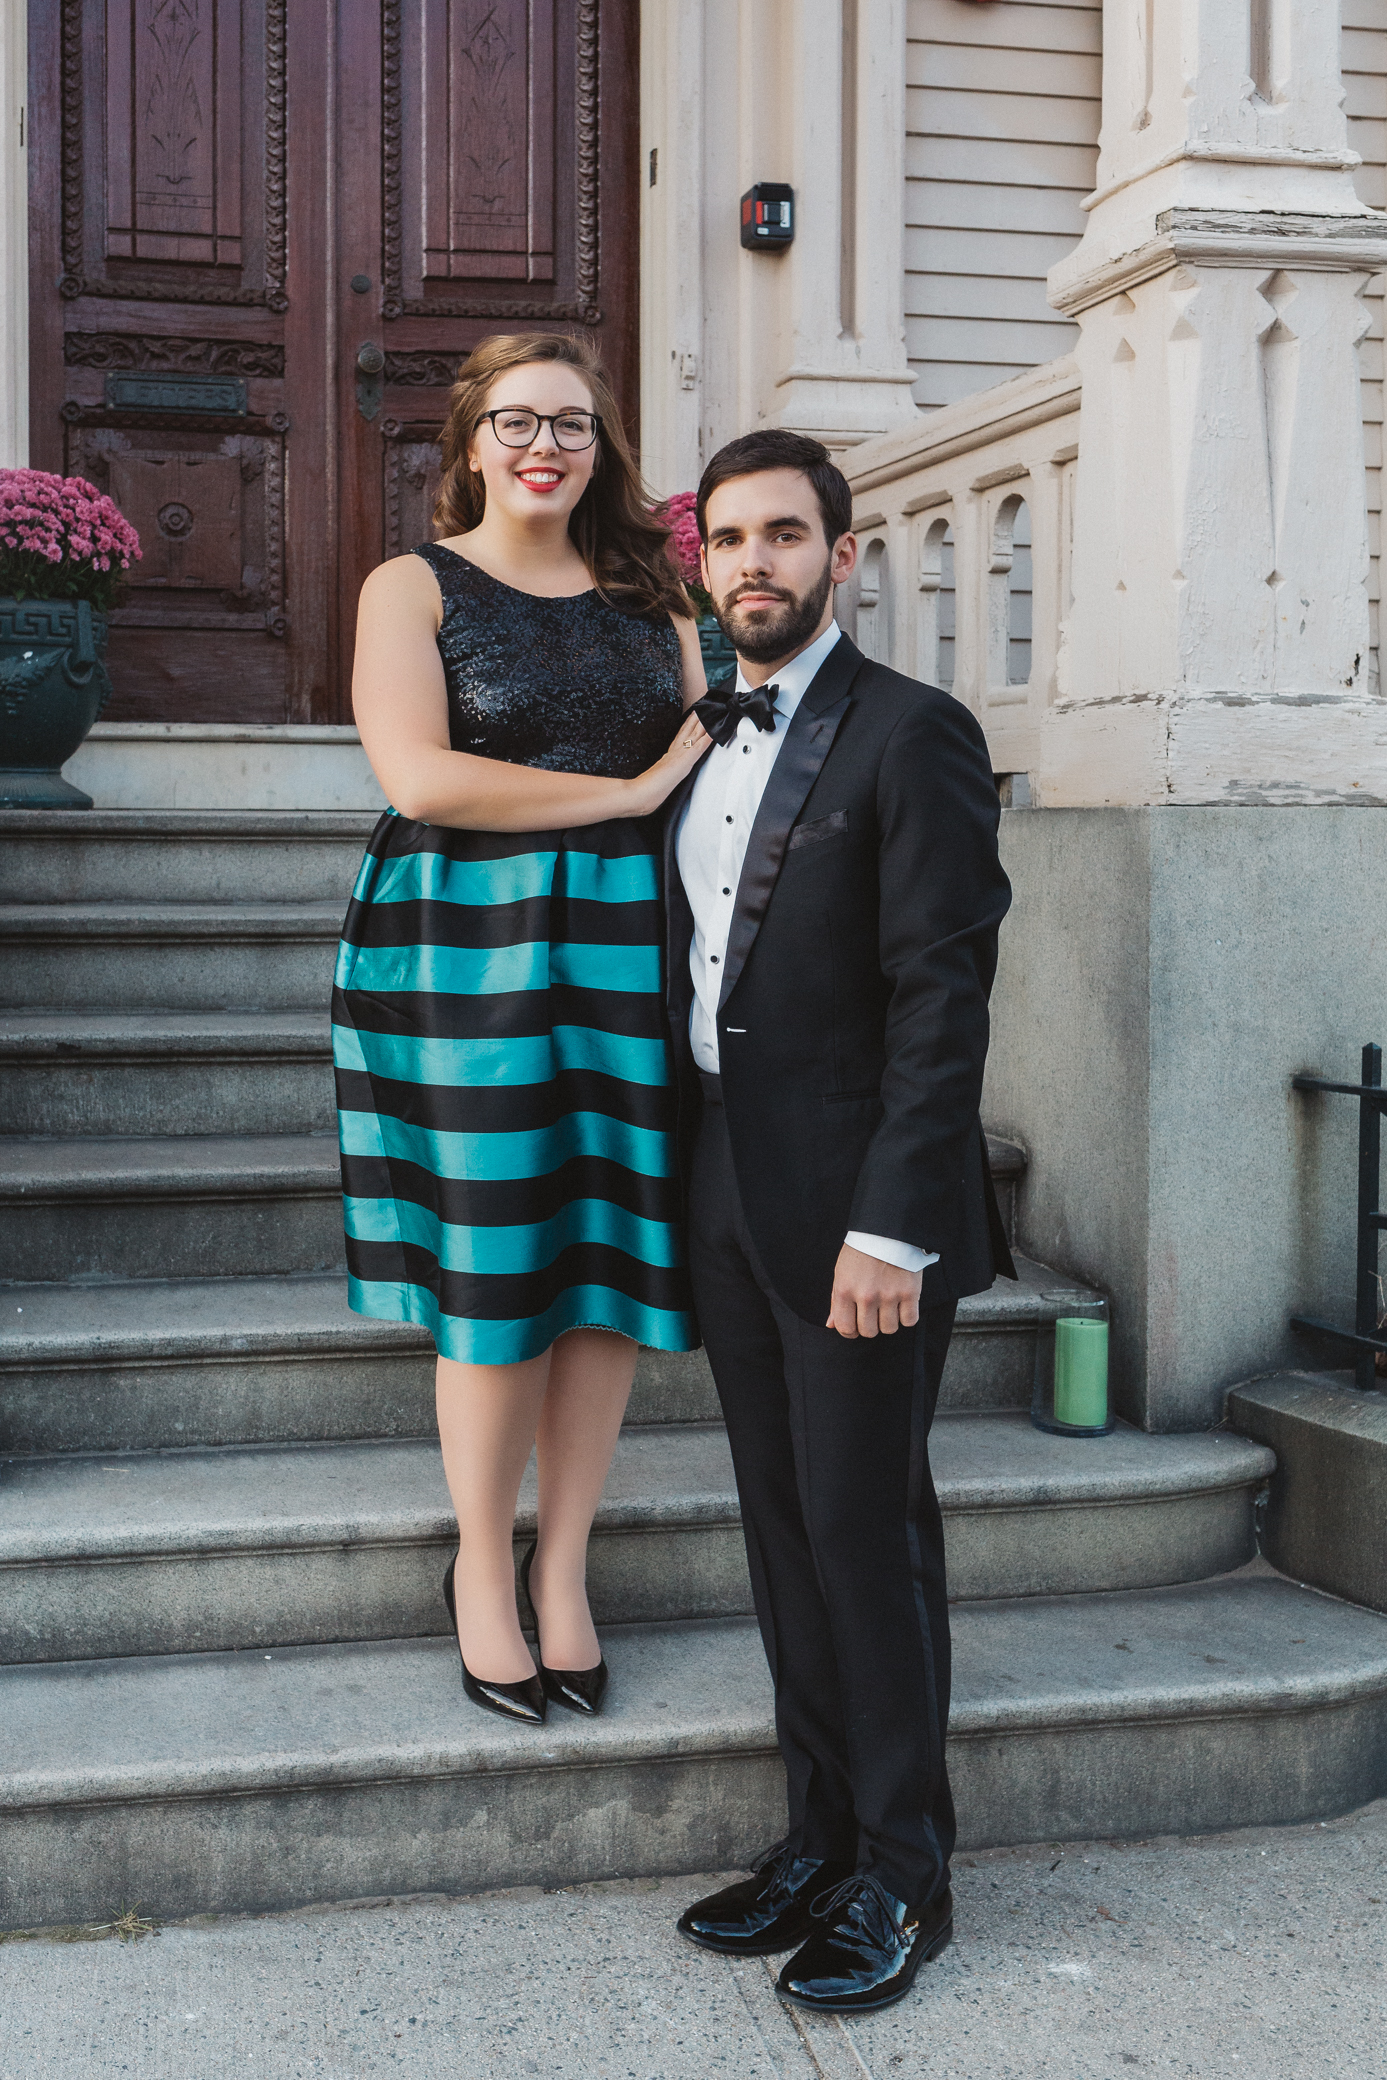 Attending a gala for the first time ever? Here are a few prep tips for the gals and the guys. Click through to By Gabriella for the full article. | bygabriella.co